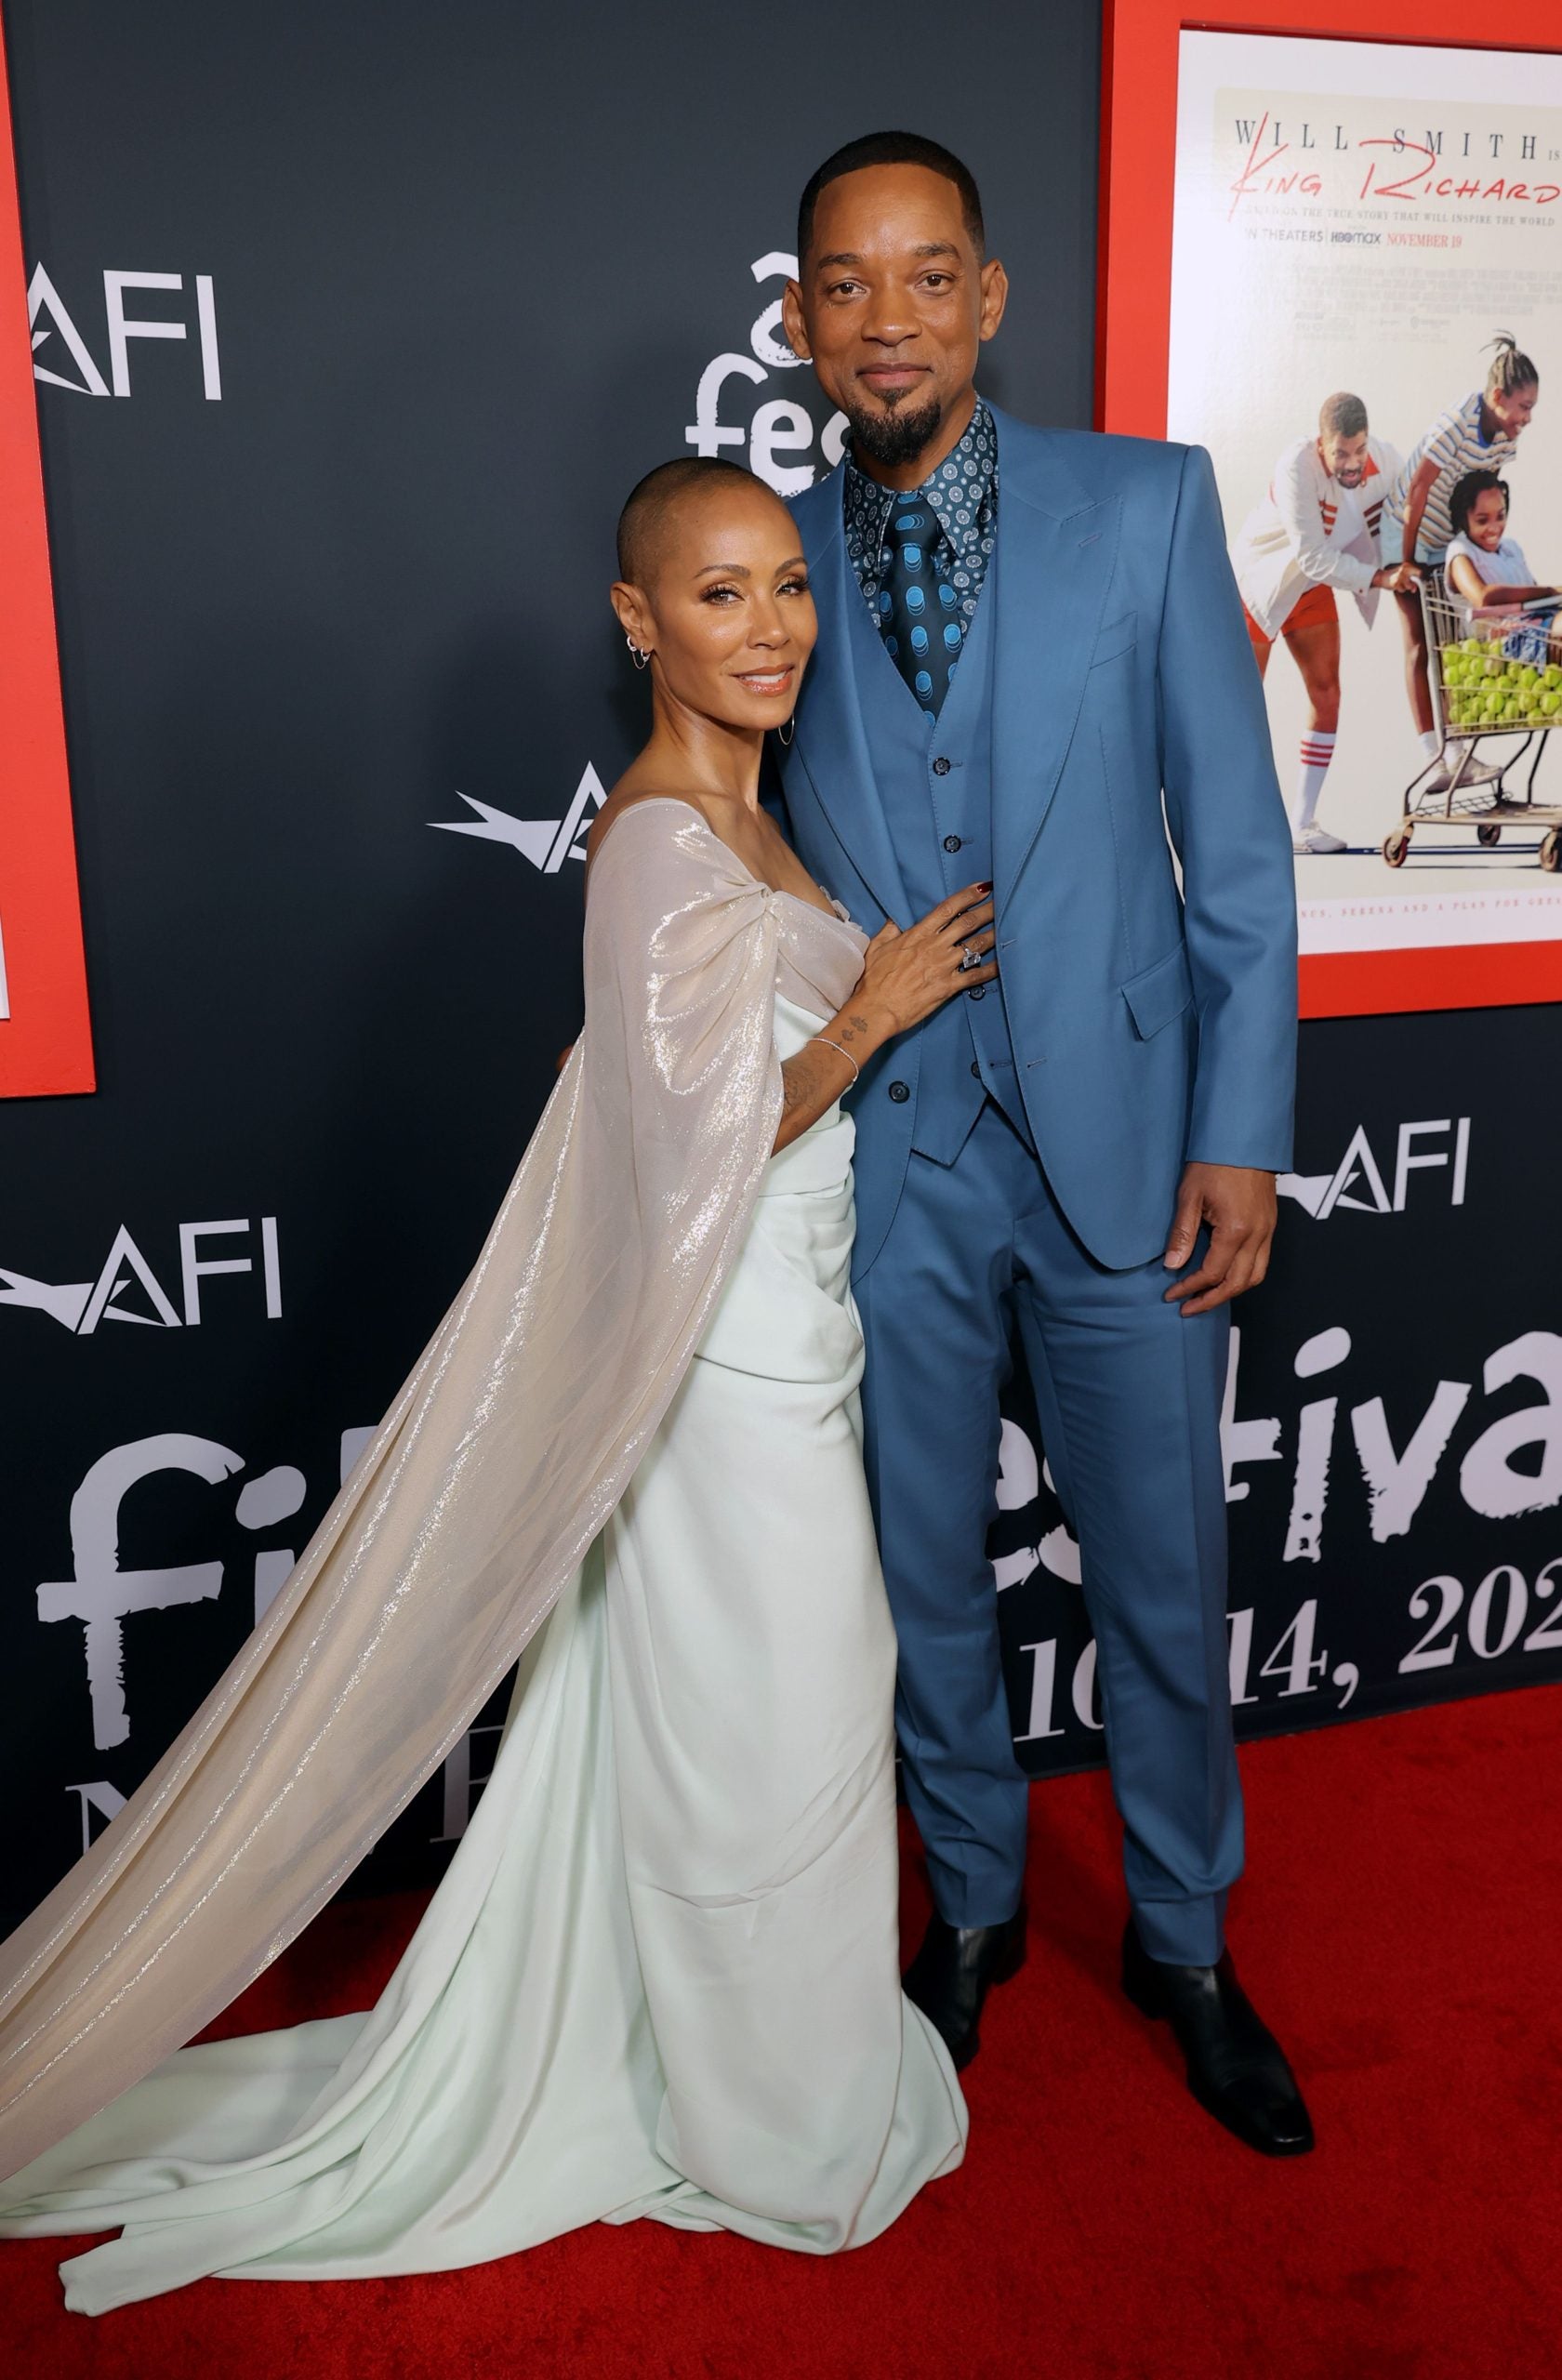 Venus & Serena Williams Join Will Smith And Family For The 'King Richard' Red Carpet Premiere